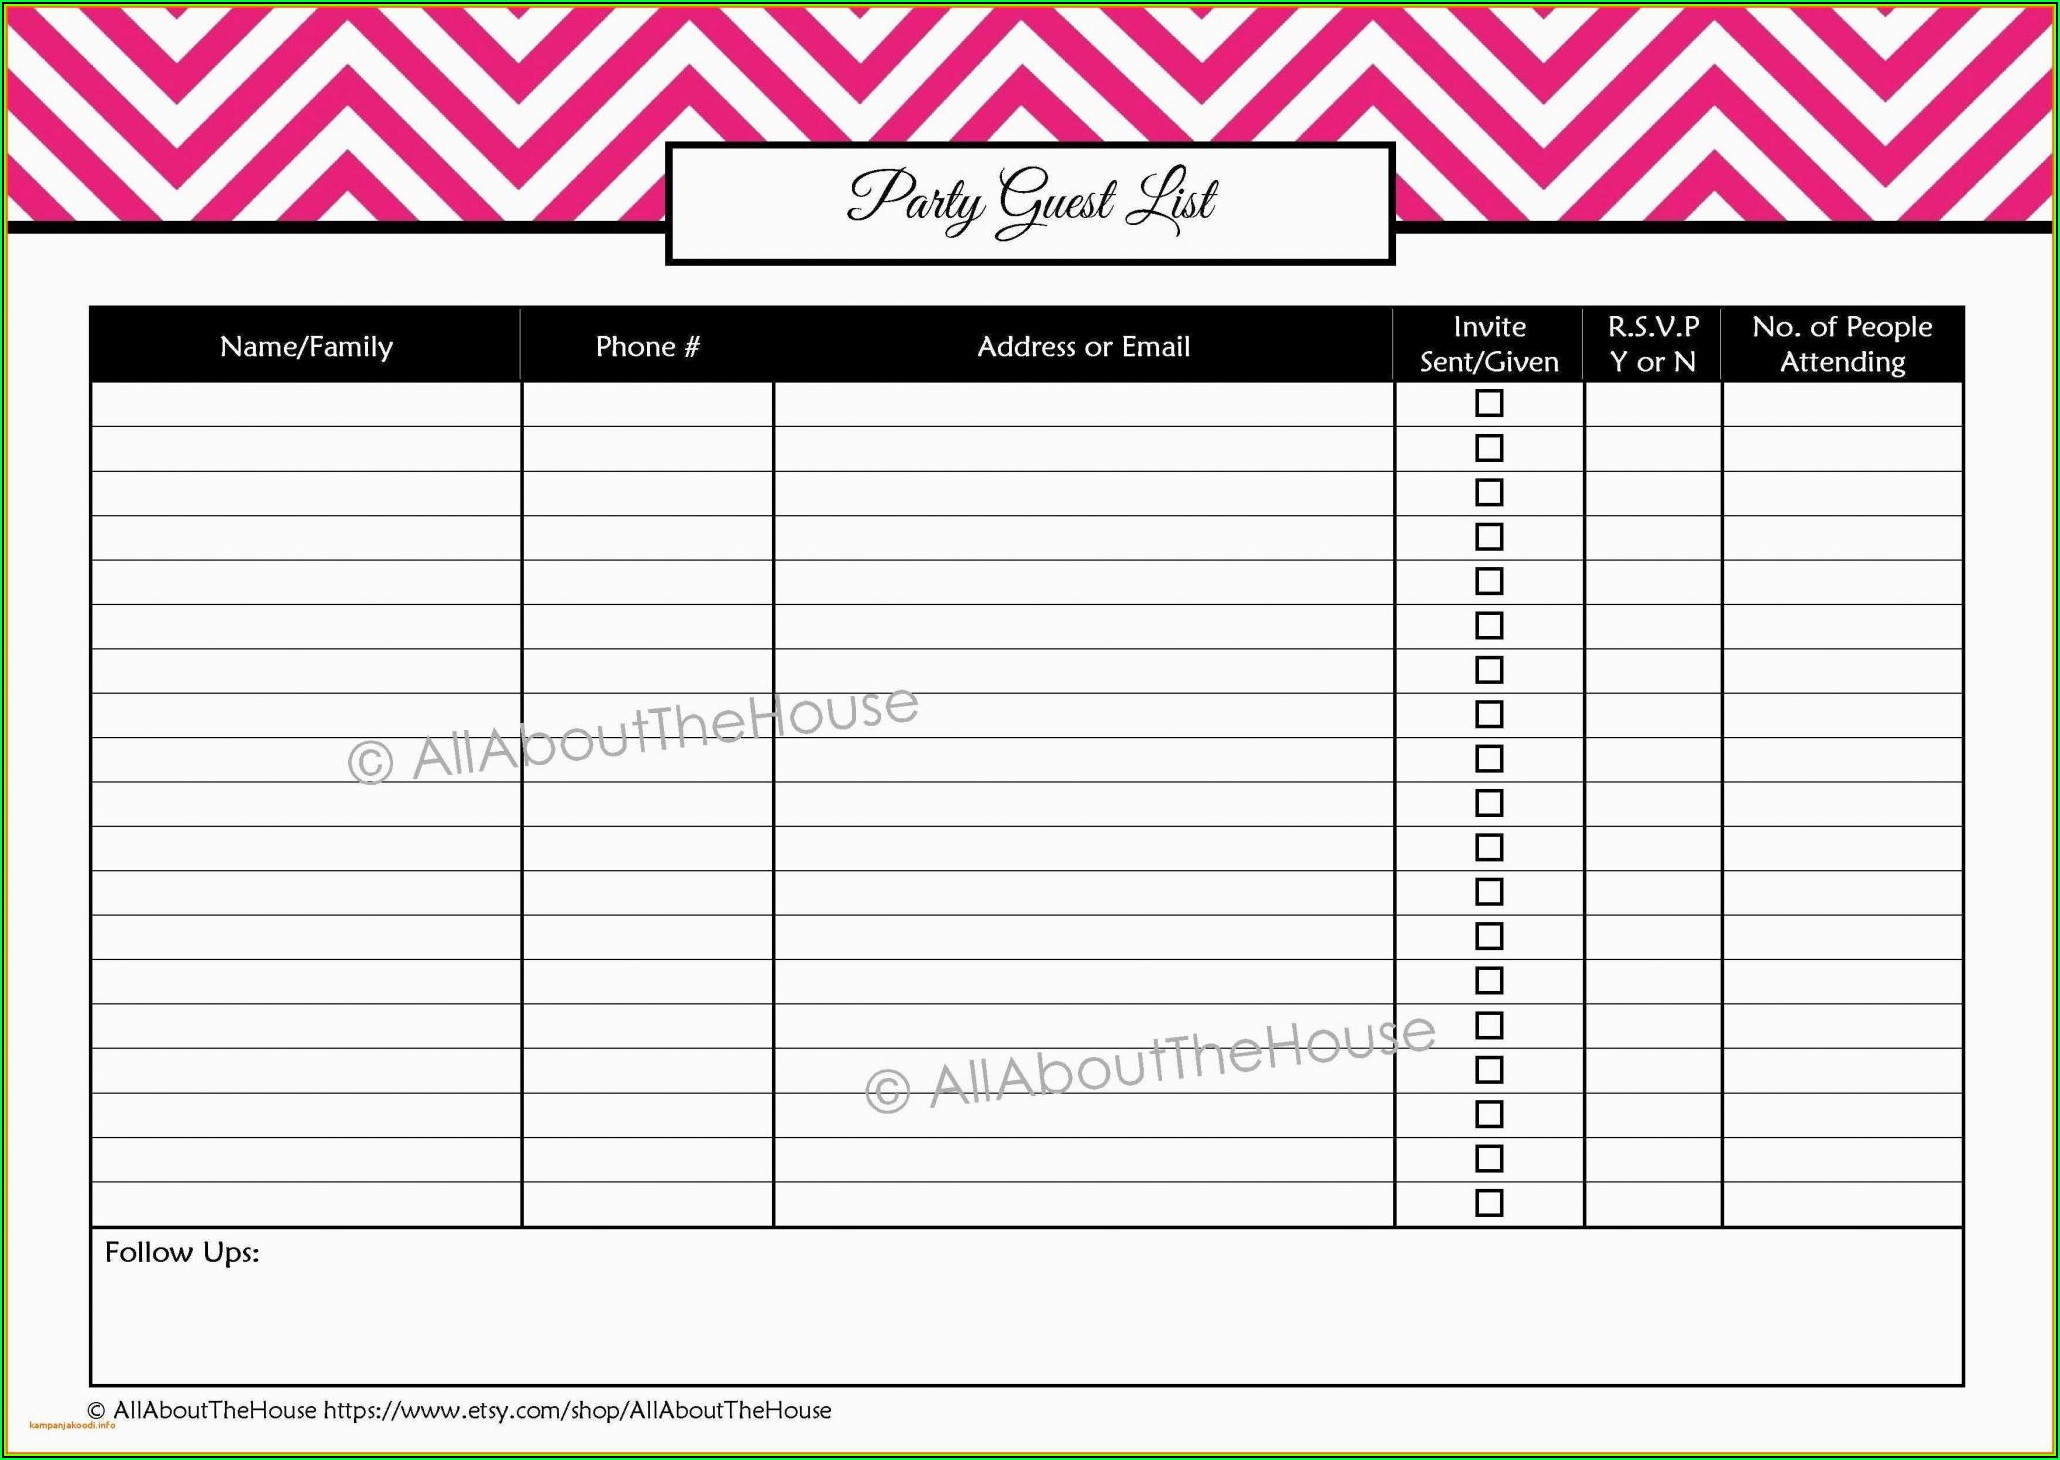 Template For Mailing Labels 30 Per Sheet